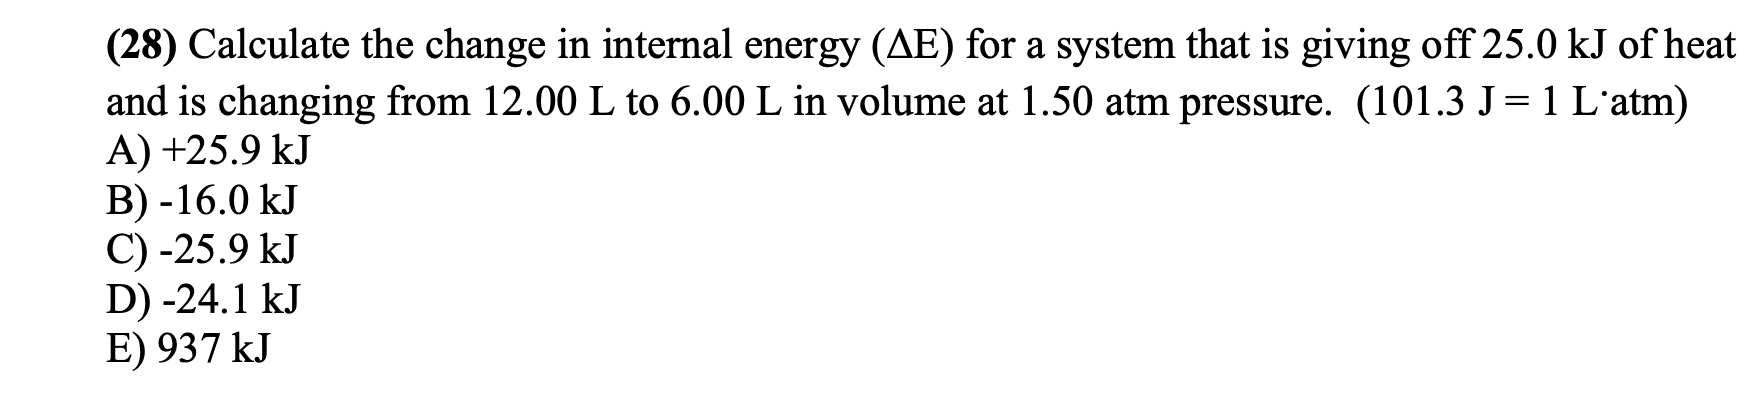 (28) Calculate the change in internal energy (AE) for a system that is giving off 25.0 kJ of heat
and is changing from 12.00 L to 6.00 L in volume at 1.50 atm pressure. (101.3 J=1 L'atm)
A) +25.9 kJ
B) -16.0 kJ
C) -25.9 kJ
D) -24.1 kJ
E) 937 kJ
